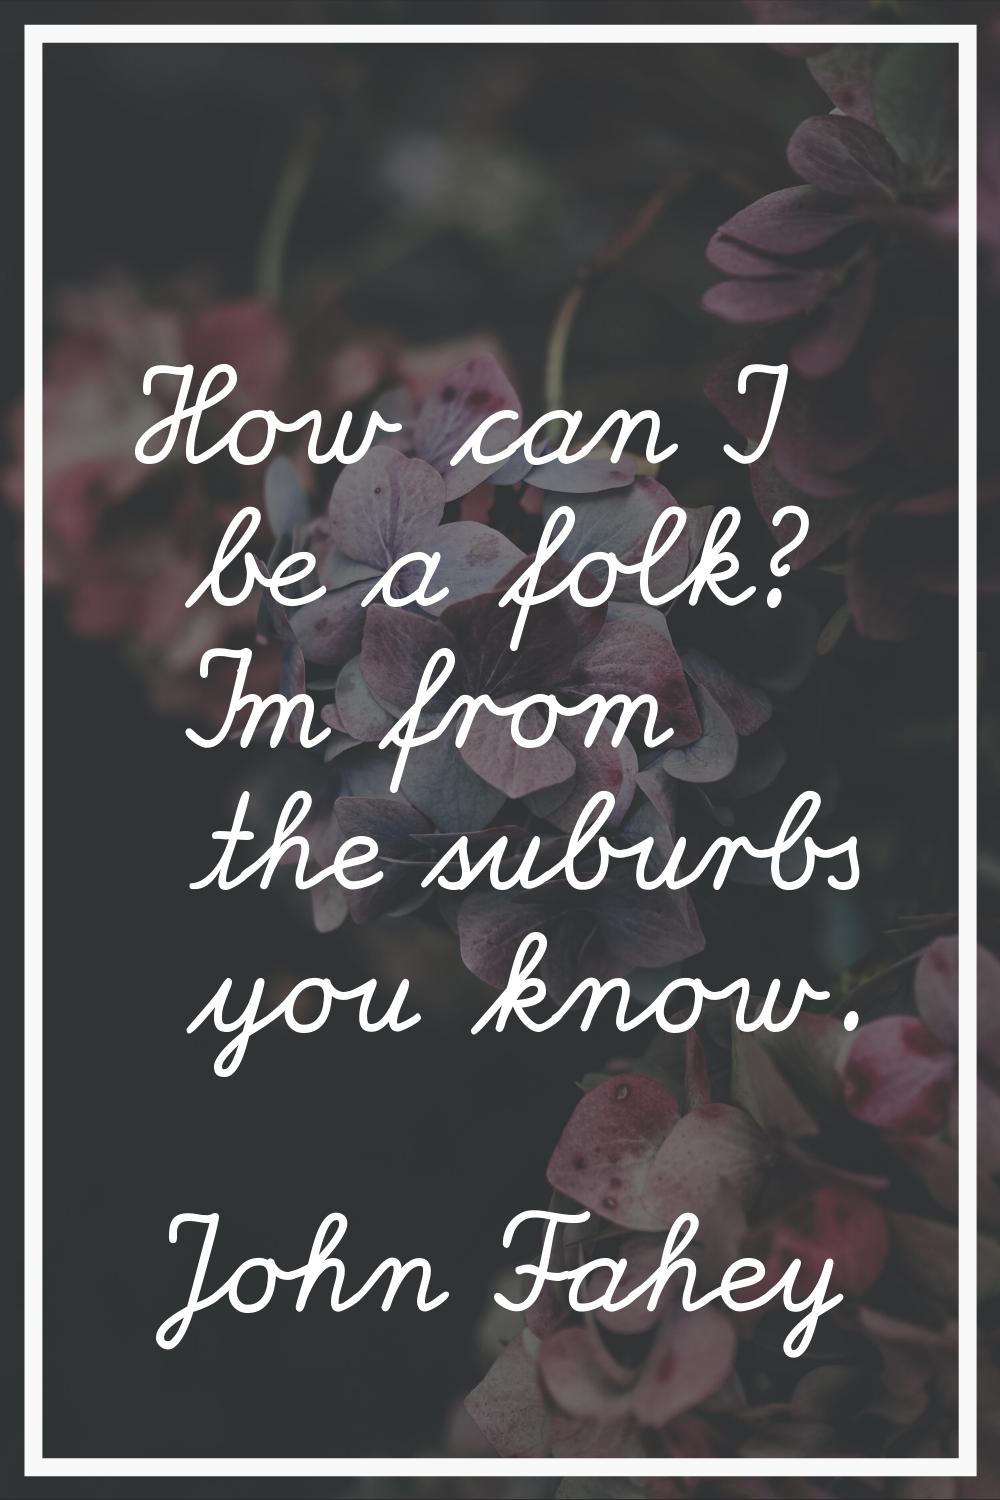 How can I be a folk? I'm from the suburbs you know.